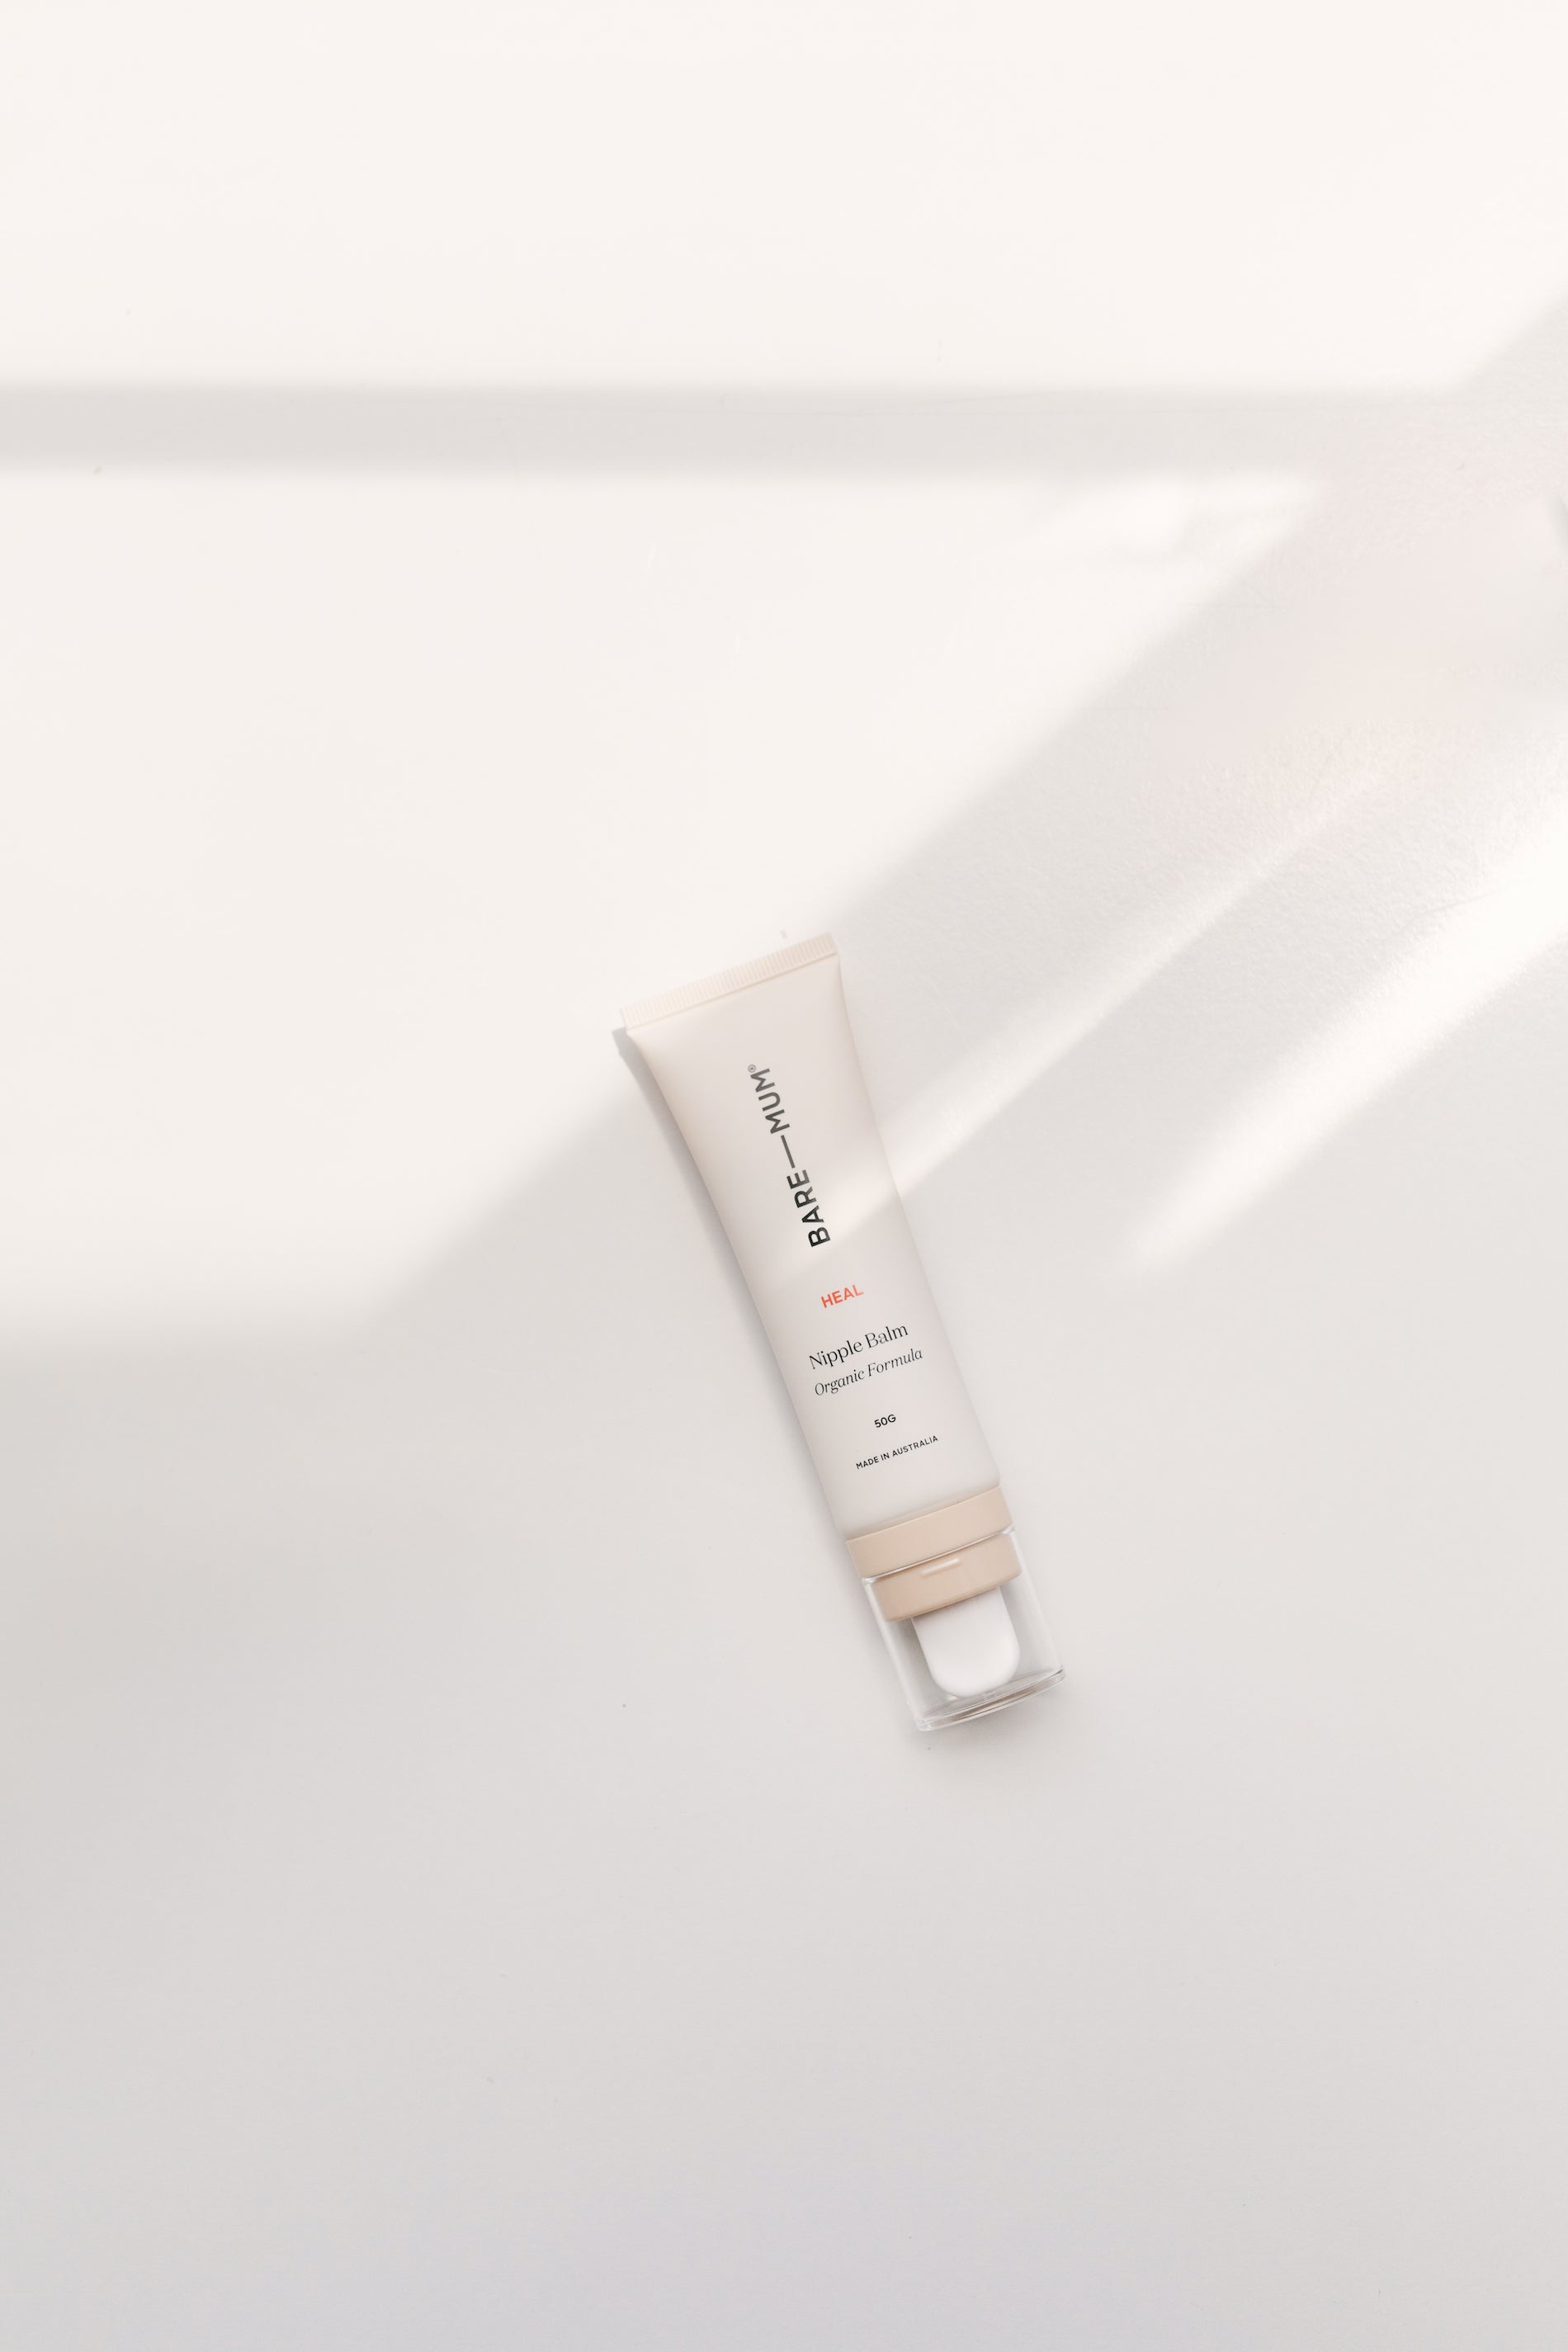 A tube of Bare Mum Nipple Balm sitting on a white surface, dedicated to mothers and breastfeeding.